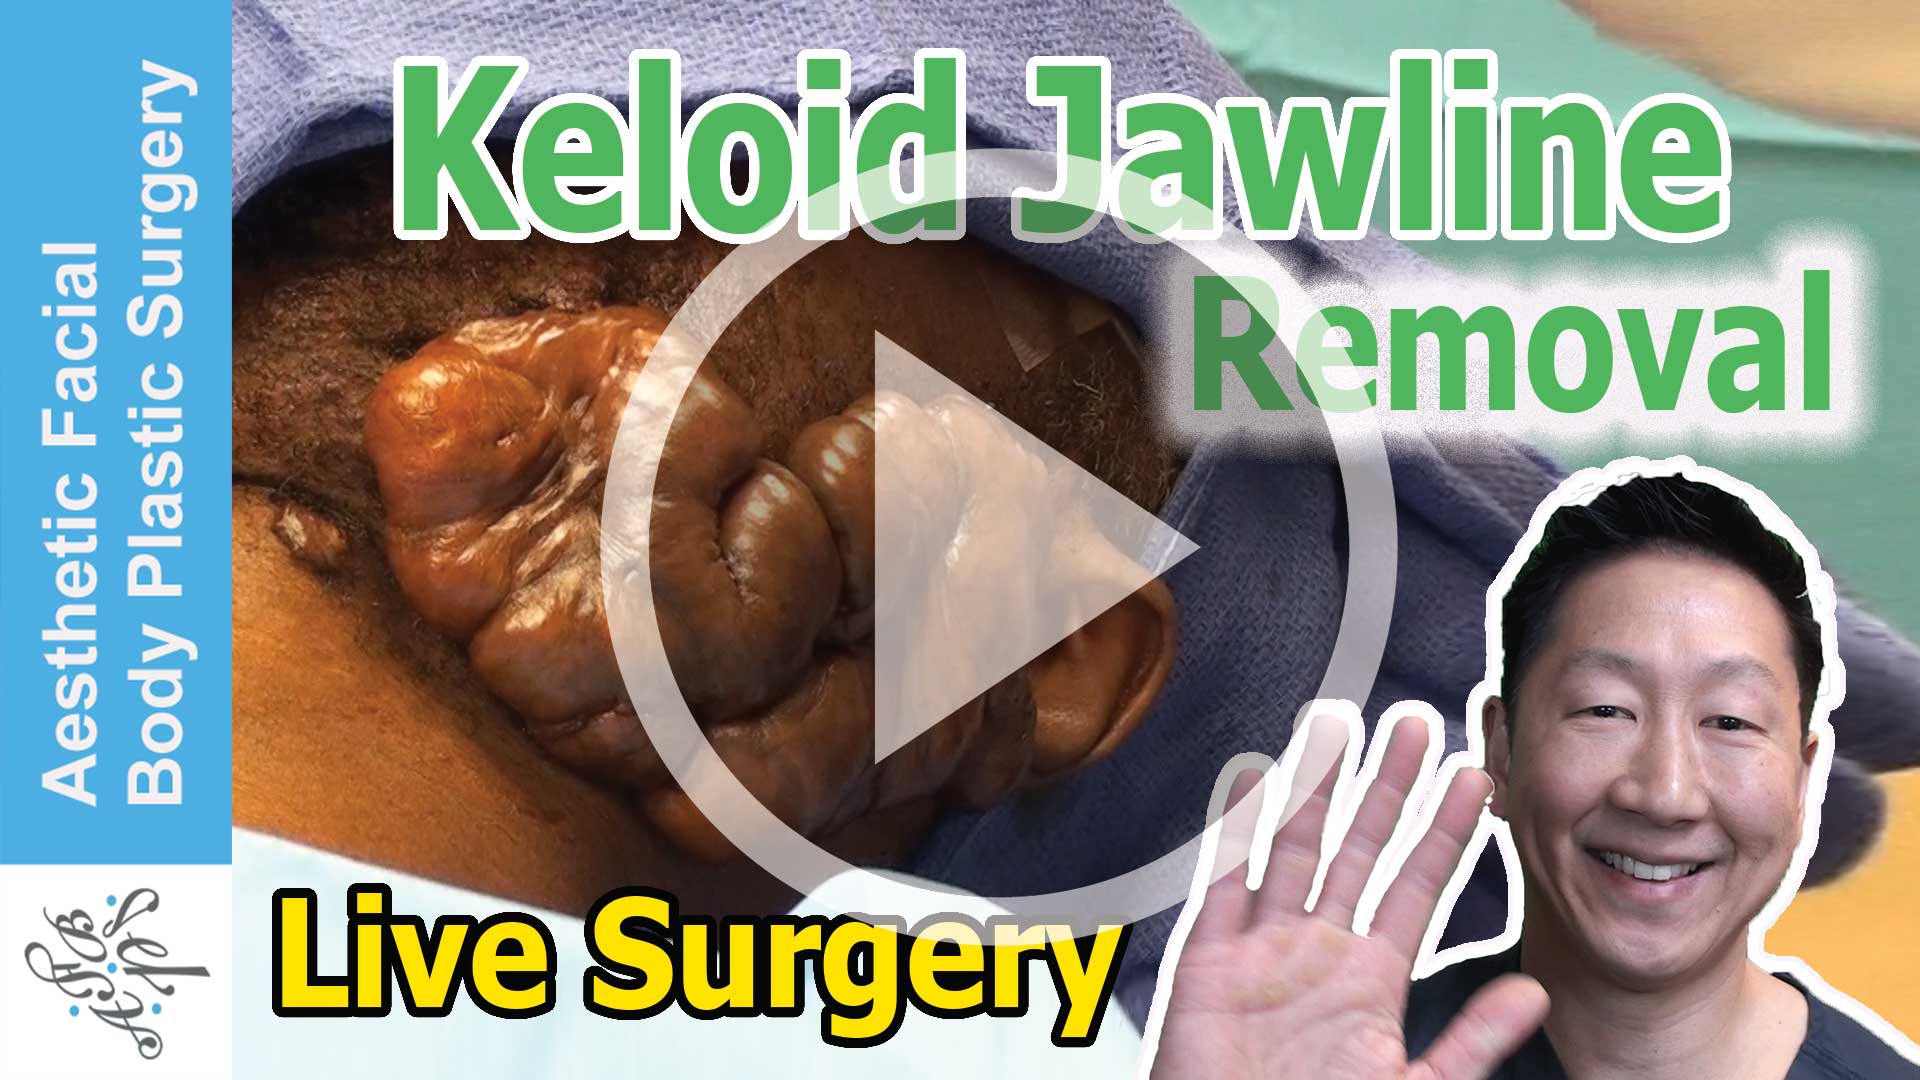 Keloid Face, Beard, Jawline Scar Removal Treatment by Secondary Intention Healing